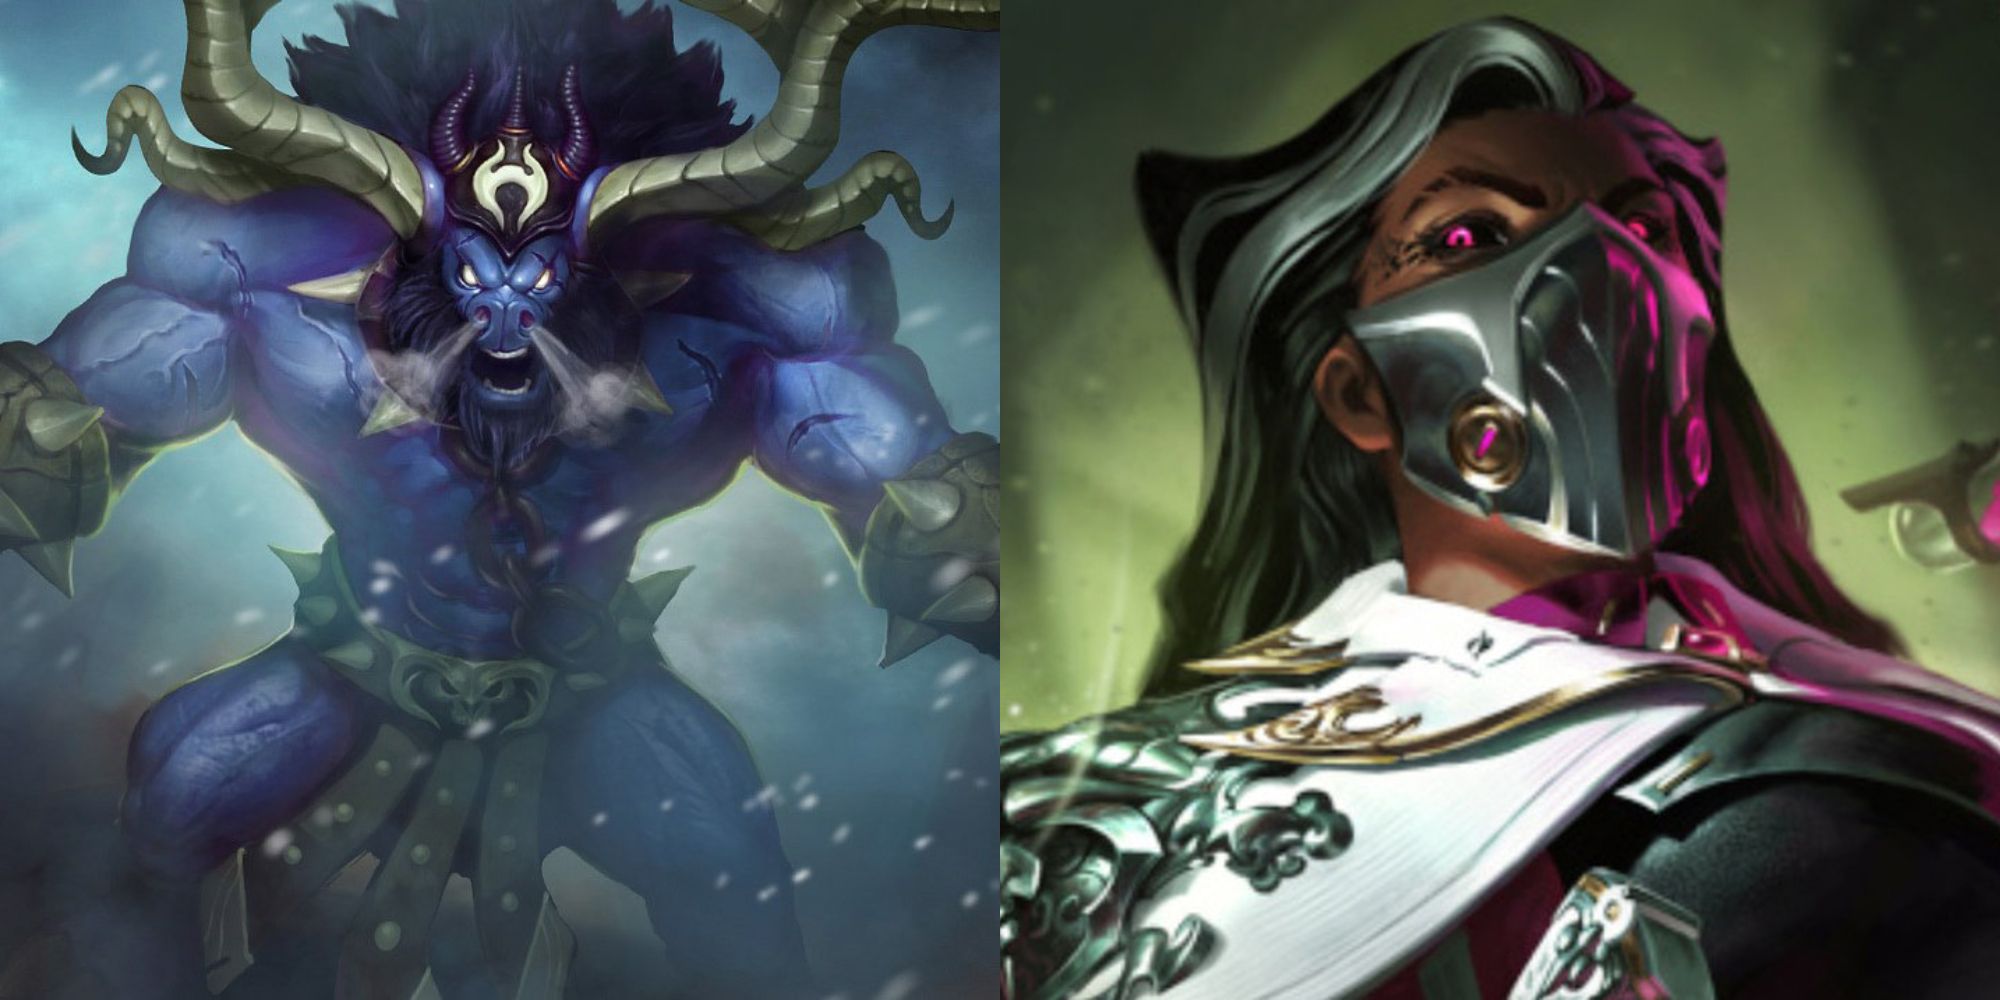 Split image showing Alistar the Minotaur and Renata Glasc in League of Legends.